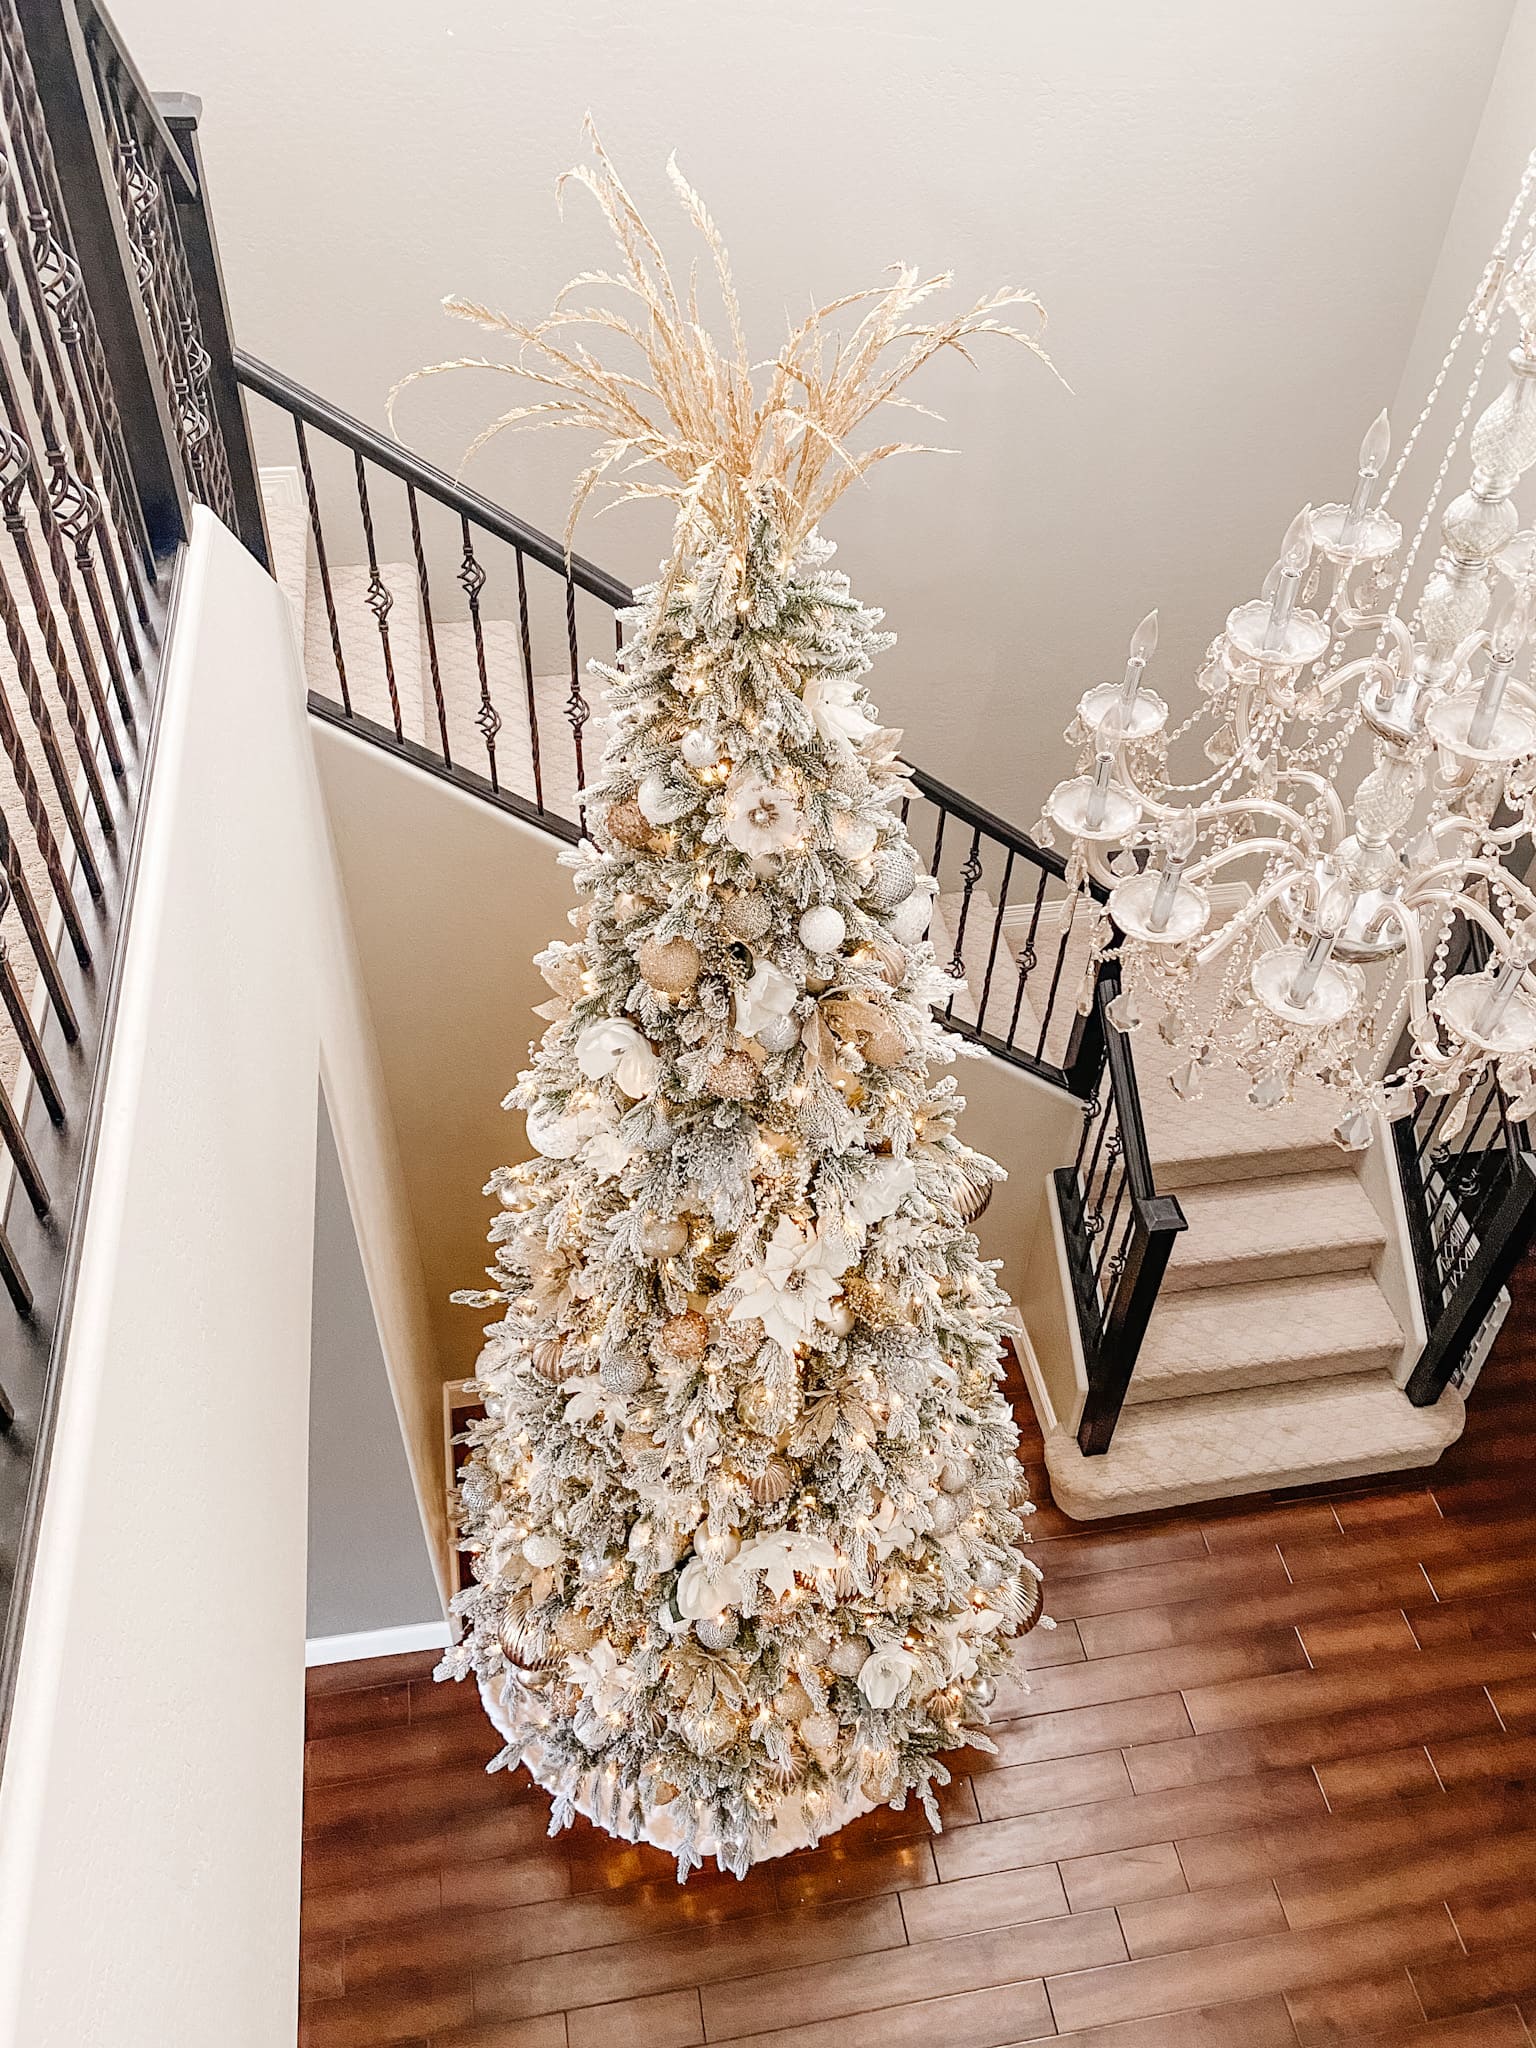 white and gold 12 foot Christmas tree in foyer looking down on tree view